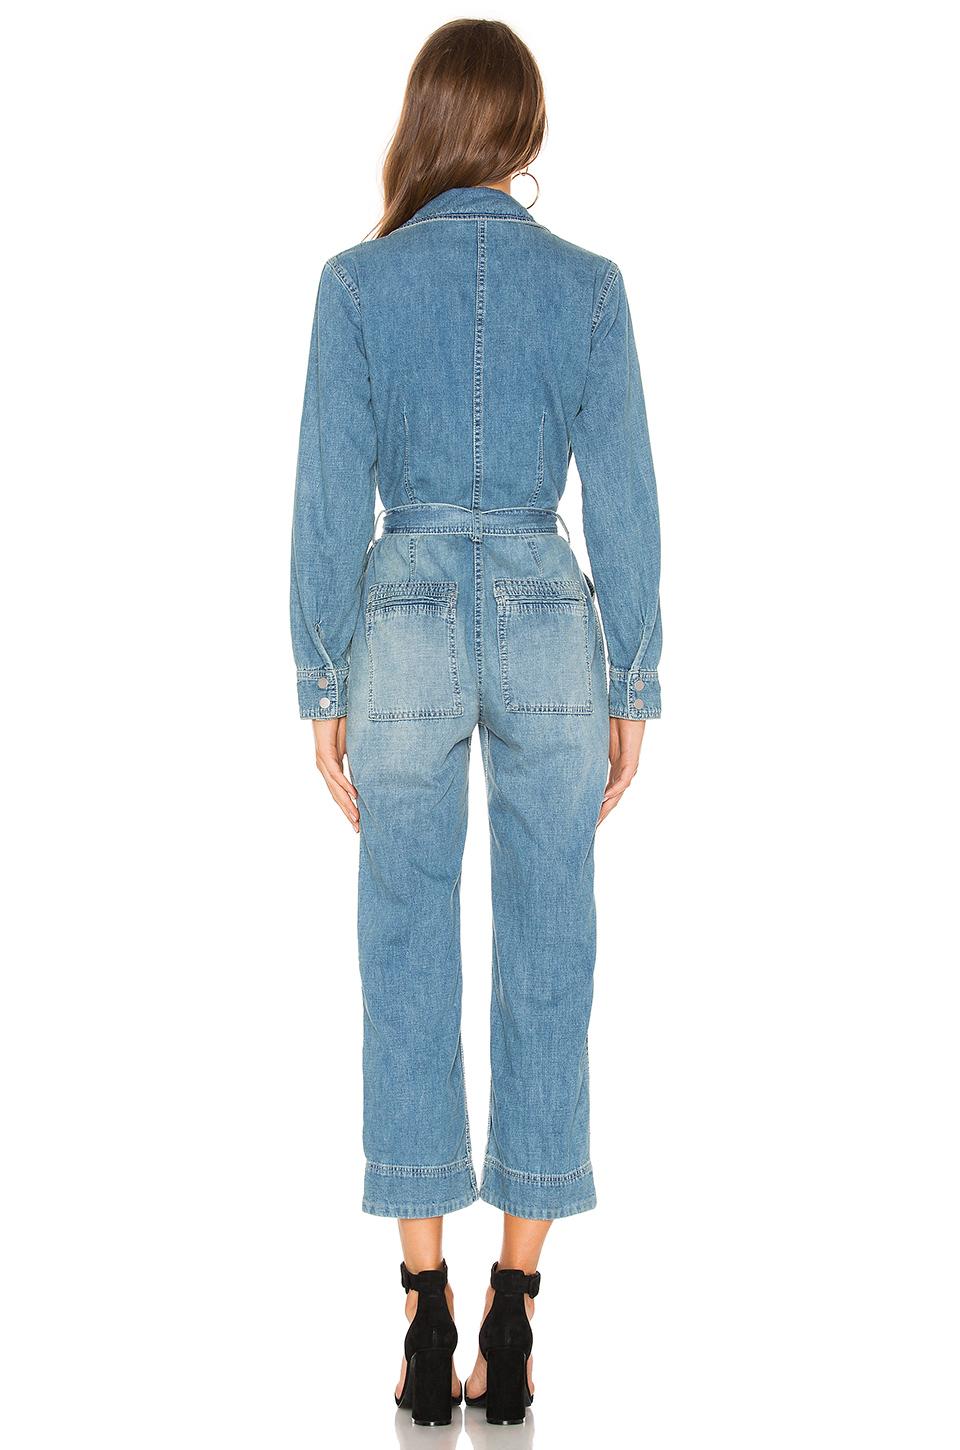 Free People Denim Charlie Coveralls in Blue - Lyst